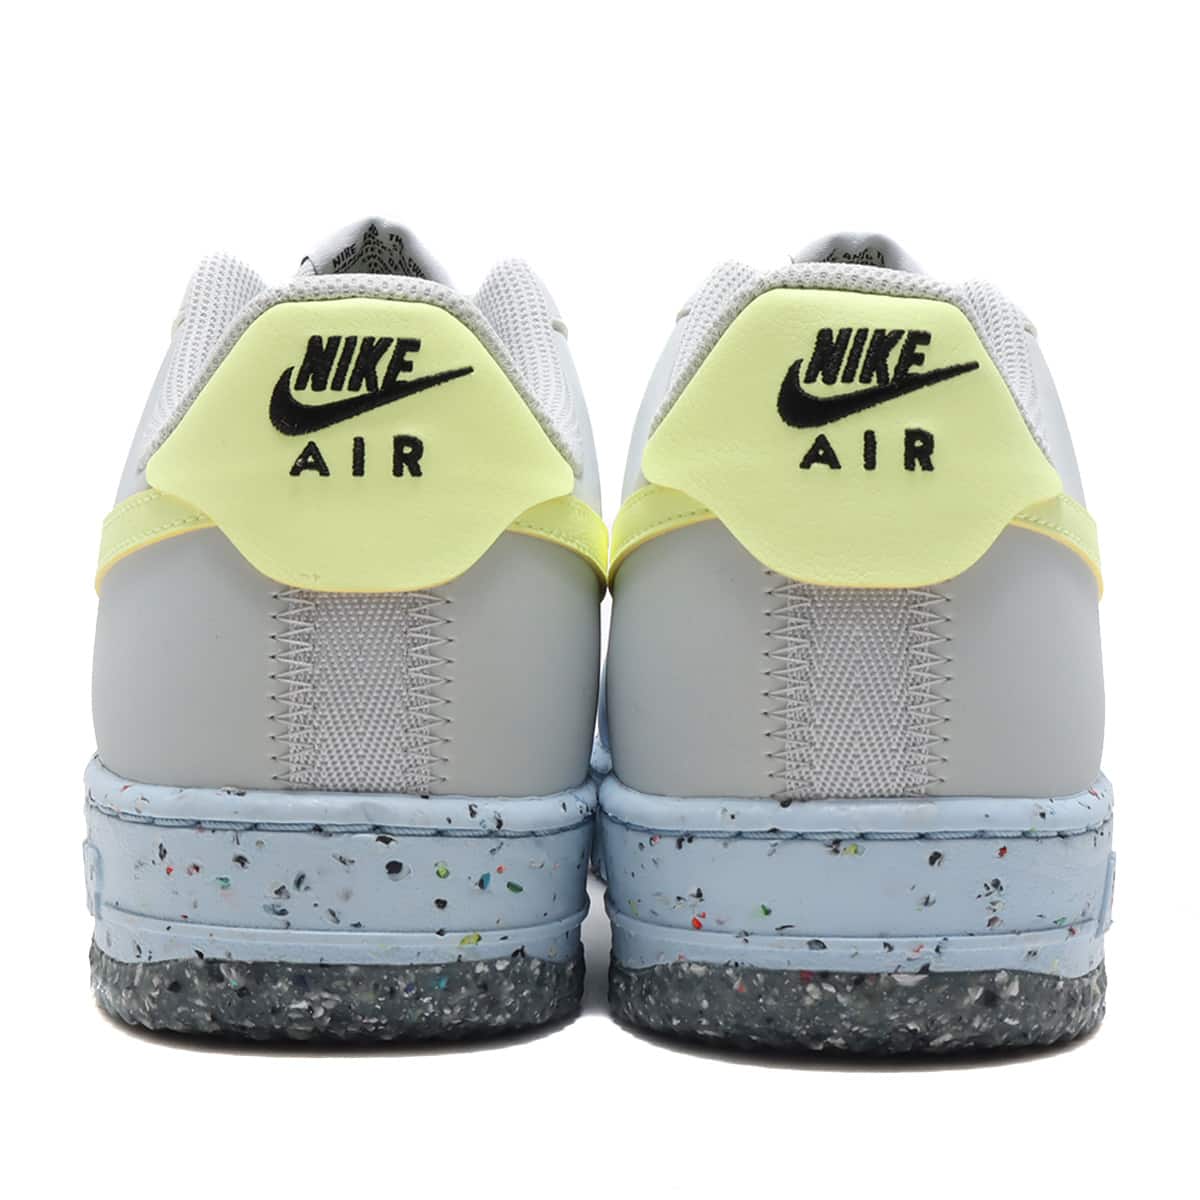 NIKE AIR FORCE 1 CRATER PURE PLATINUM/BARELY VOLT-SUMMIT WHITE 20HO-I